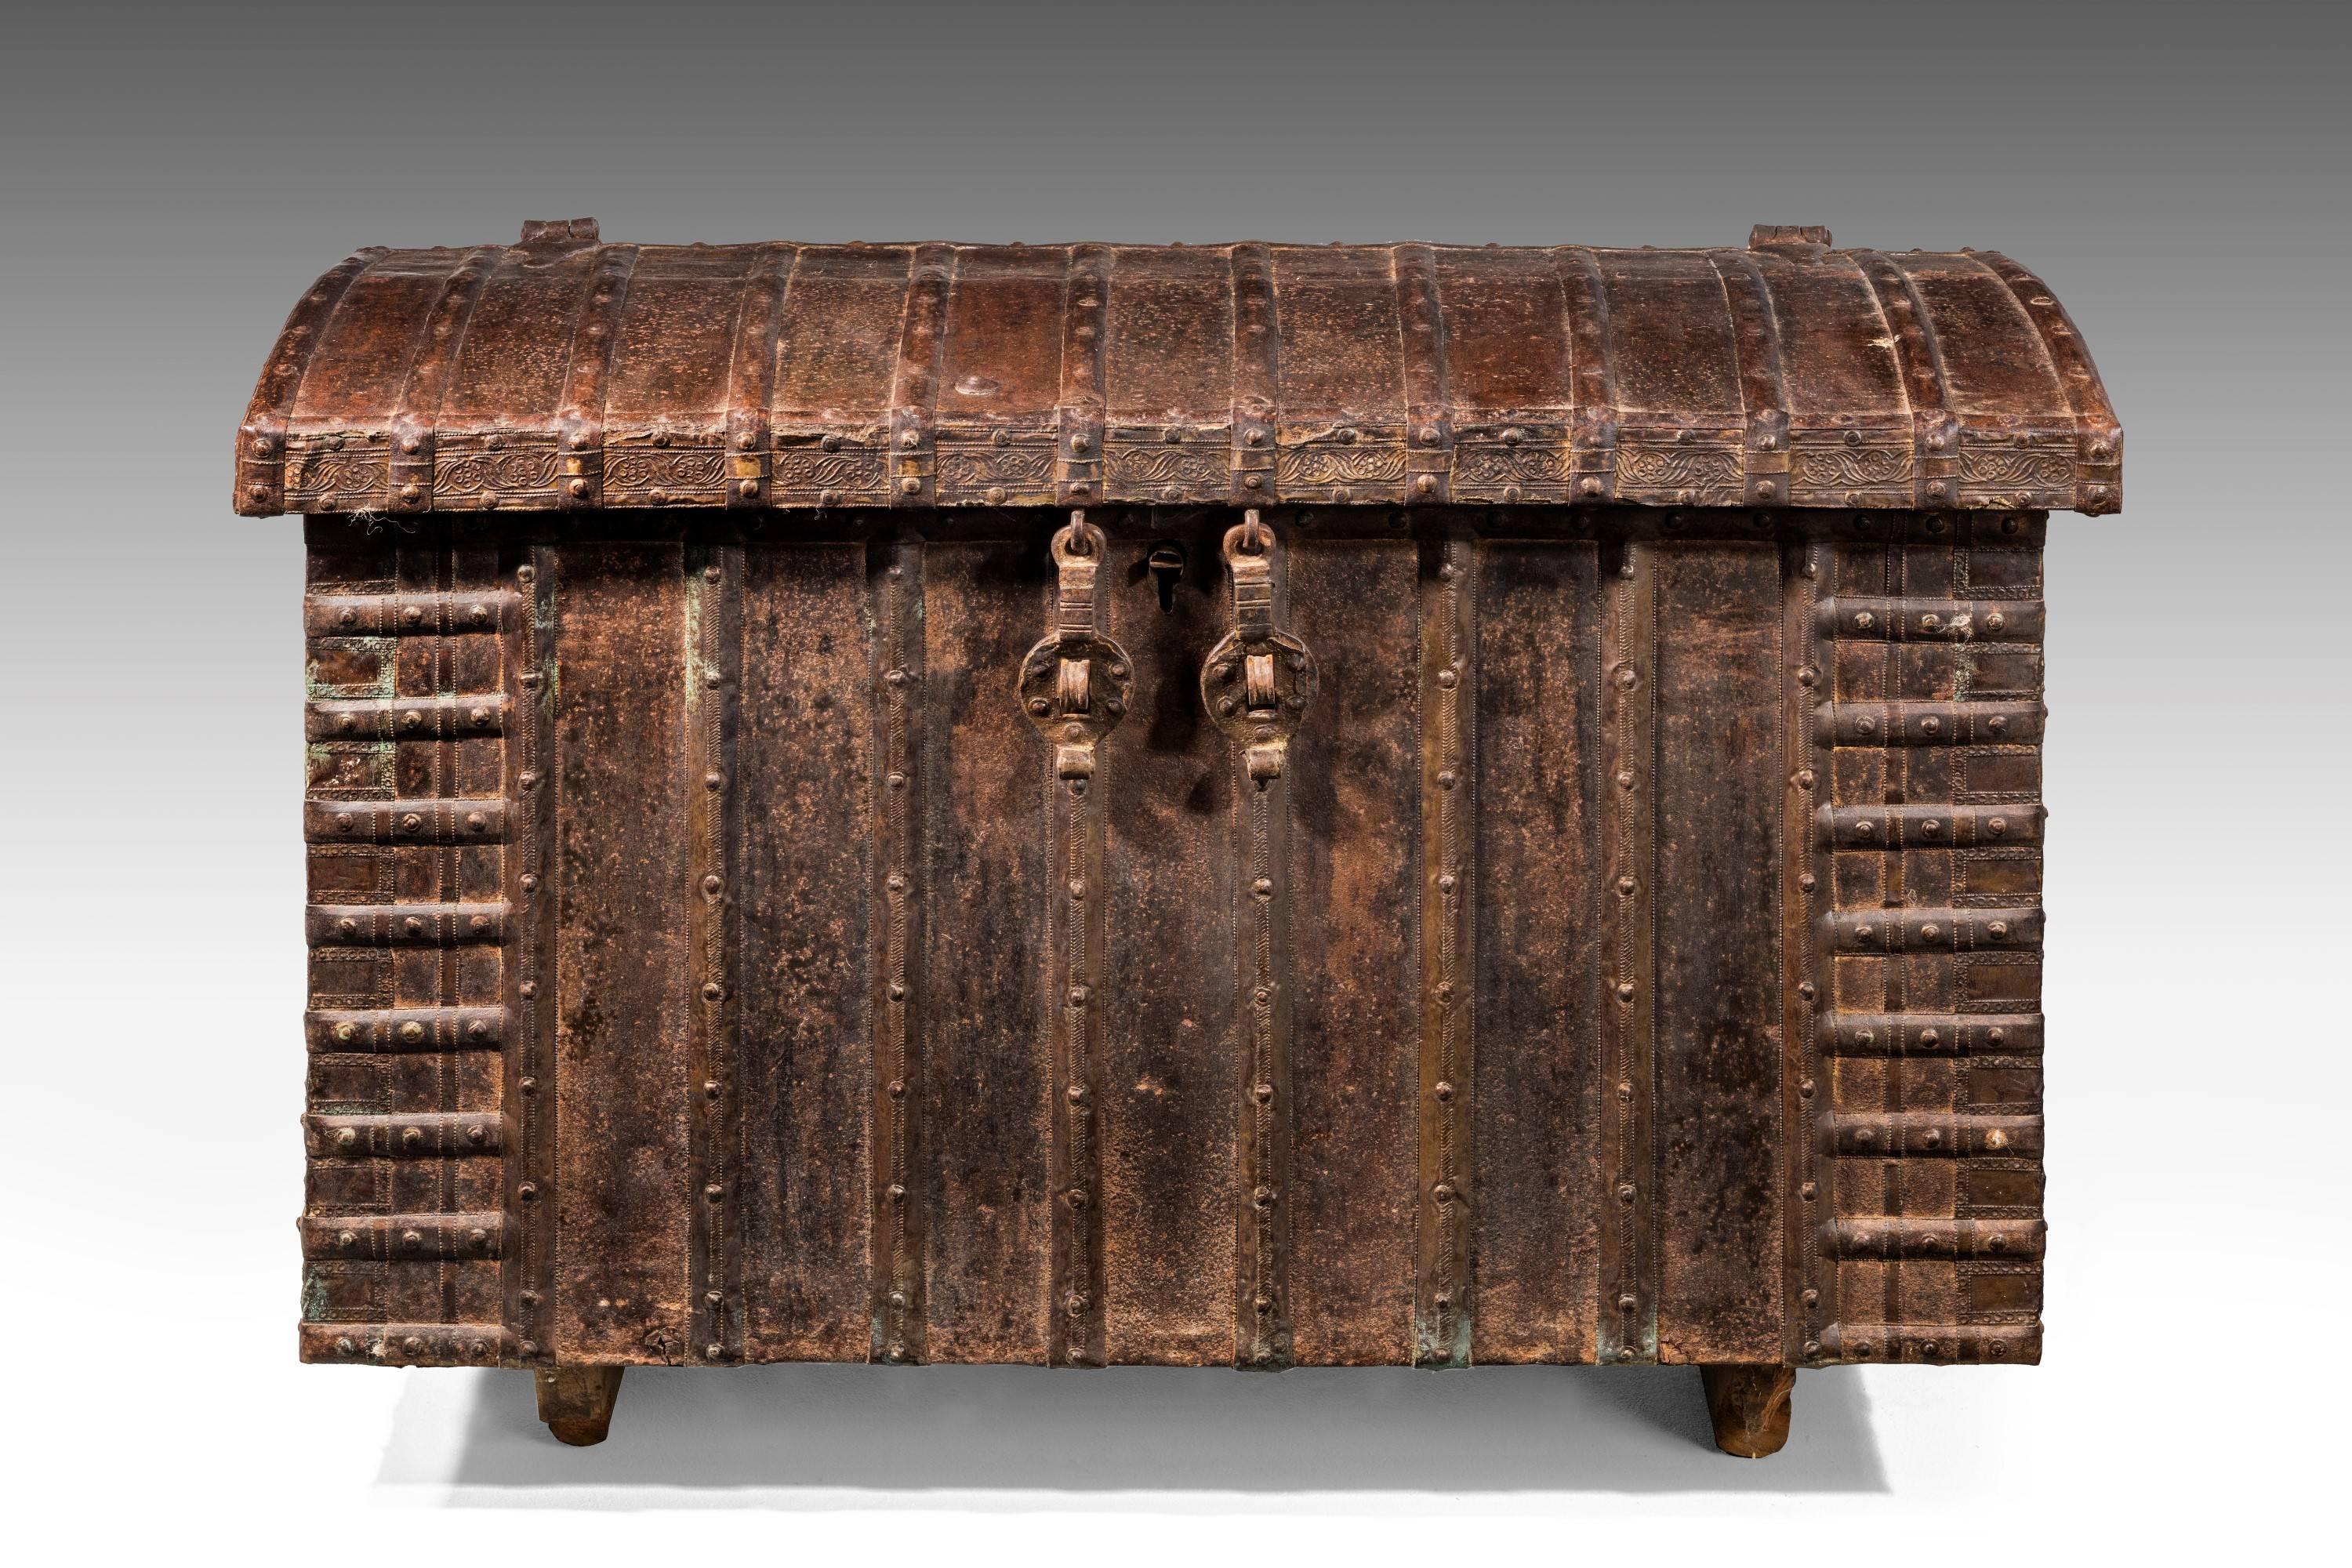 A good cast mid-19th century iron chest with strap-work detail. The slightly arched top over a ribbed lower section.